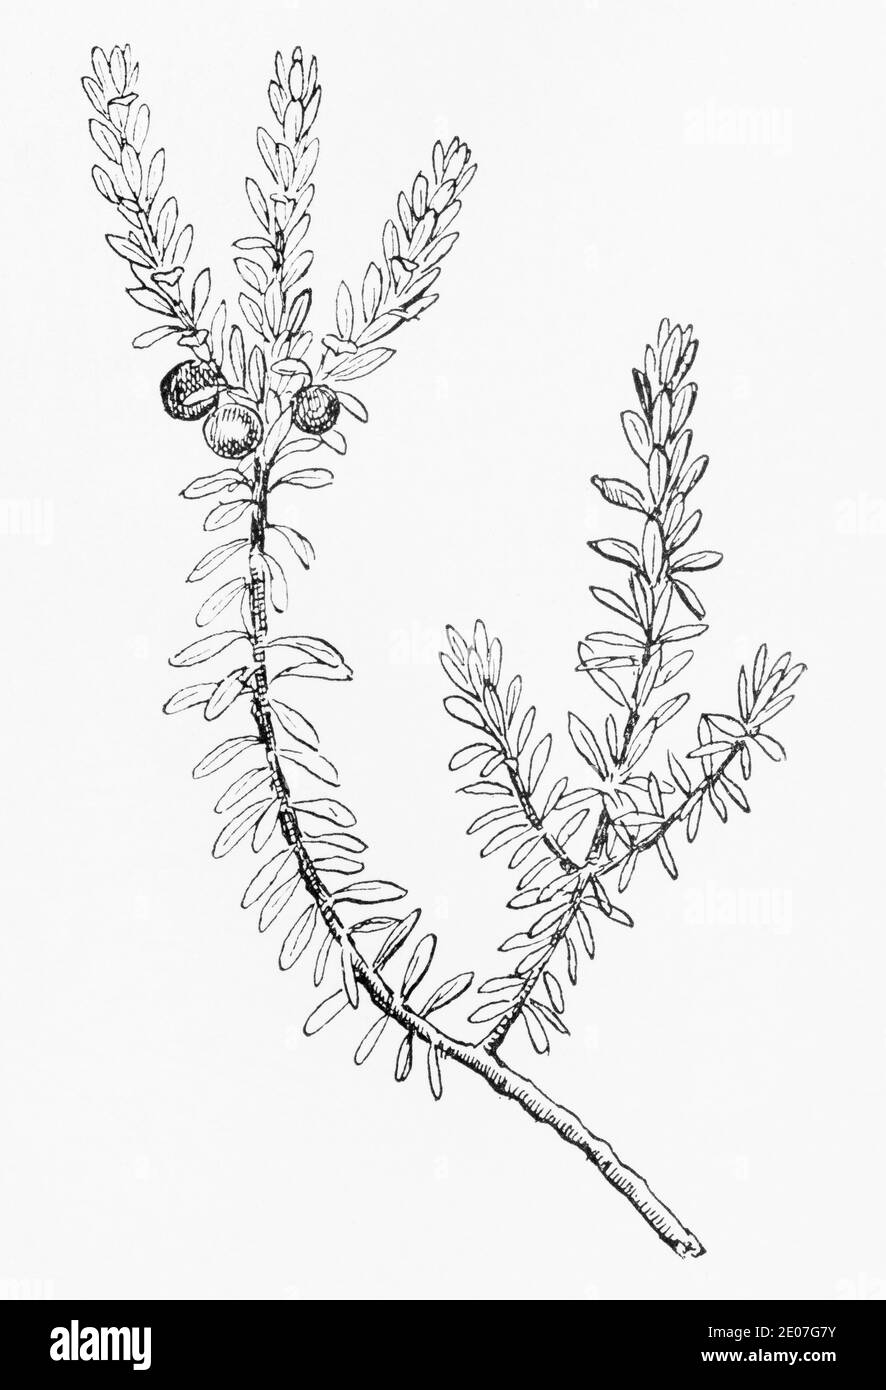 Old botanical illustration engraving of Crowberry / Empetrum nigrum. Traditional medicinal herbal plant. See Notes Stock Photo